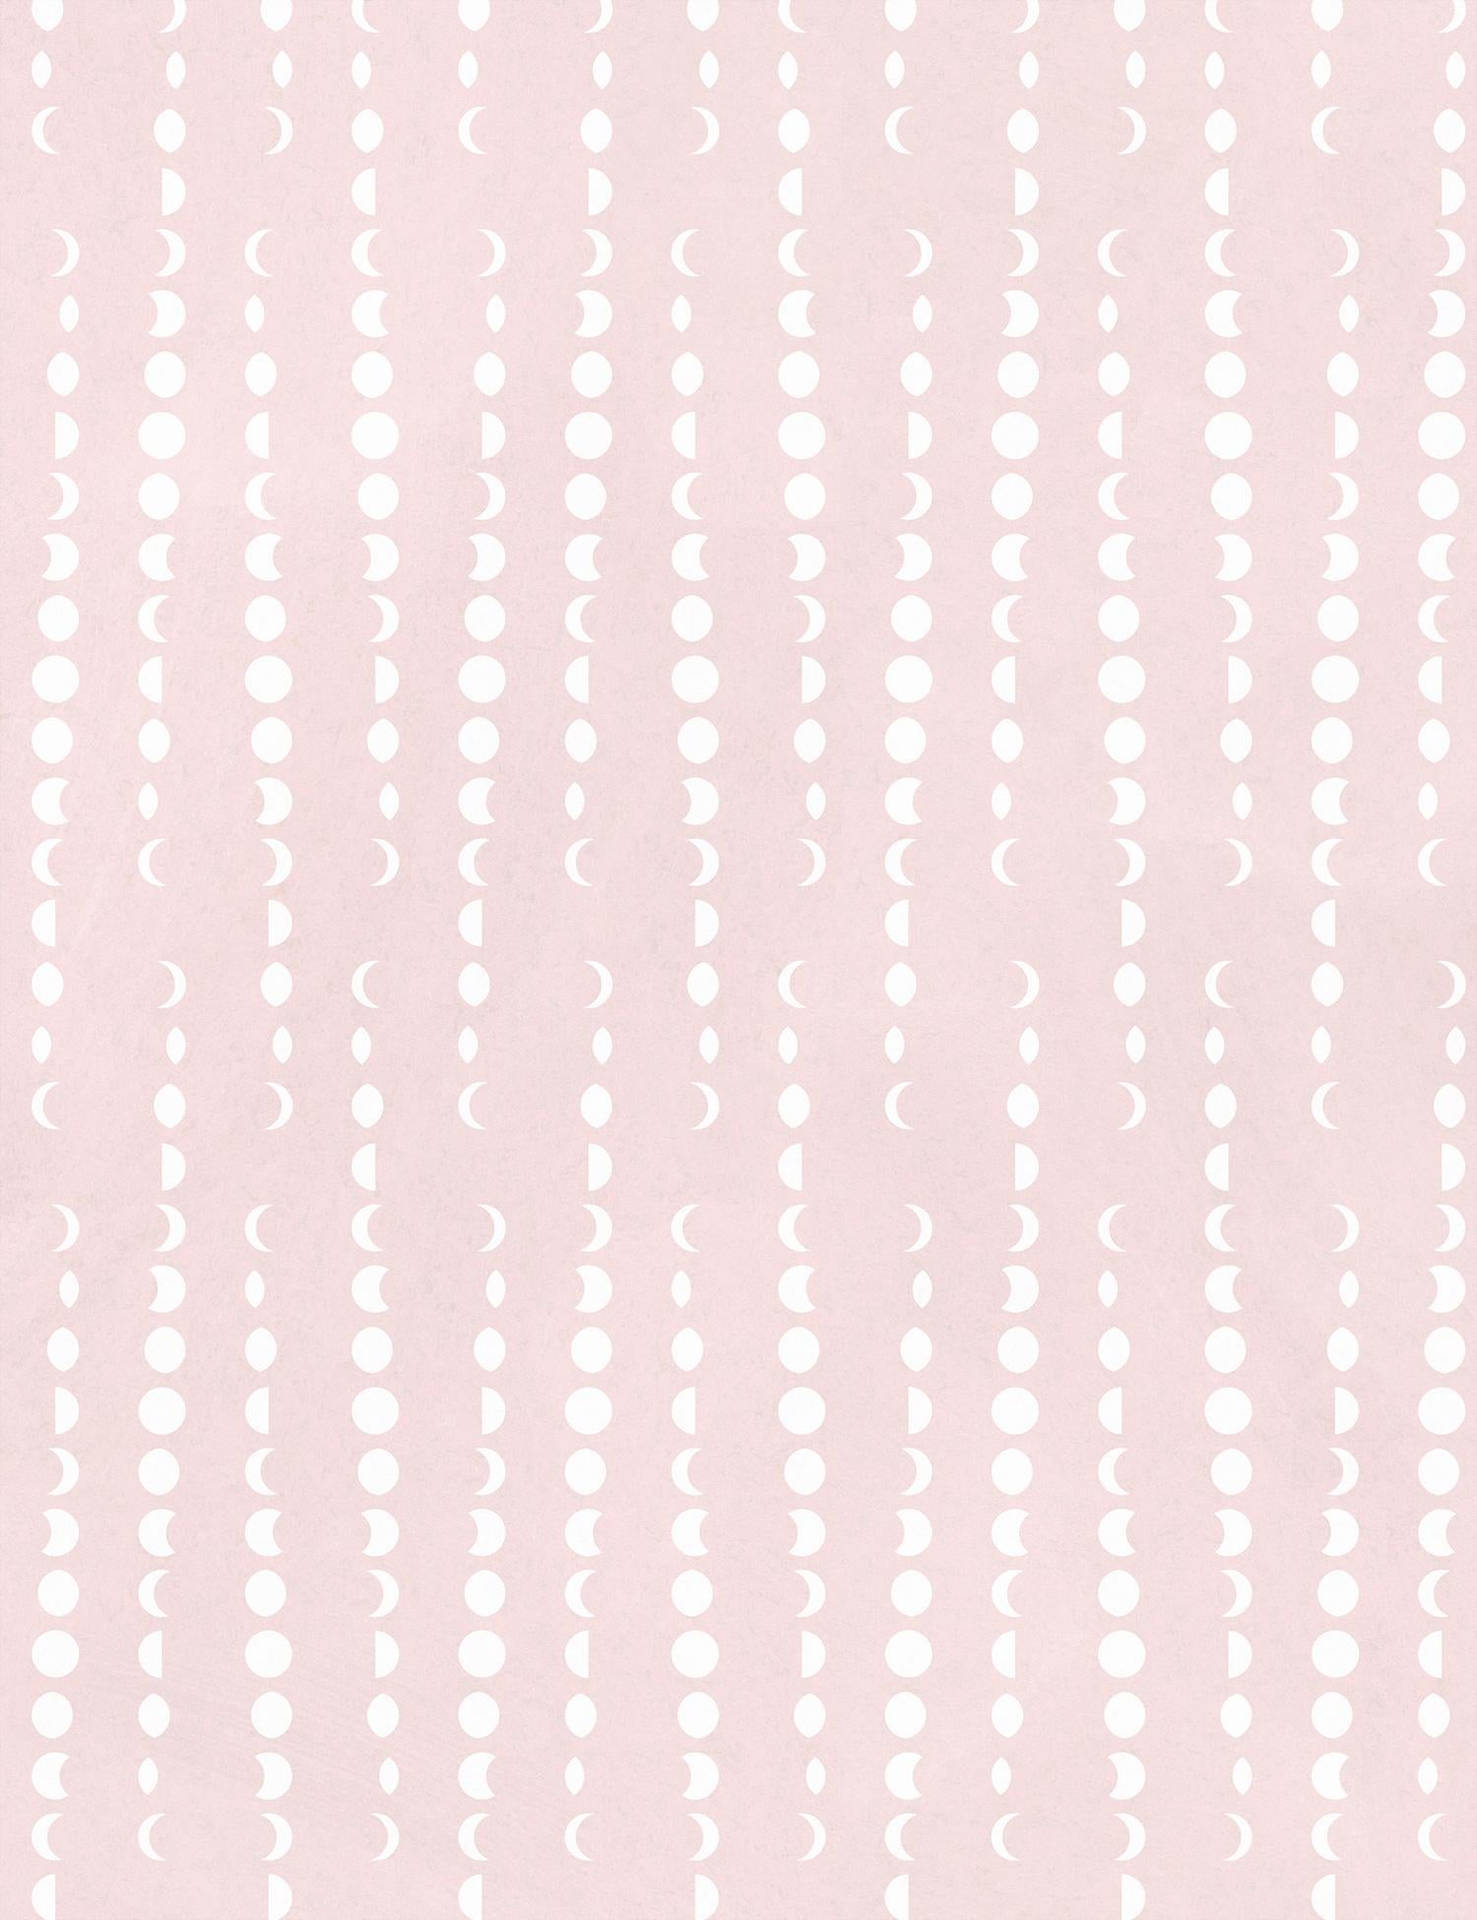 Moon Phases Plain Pink